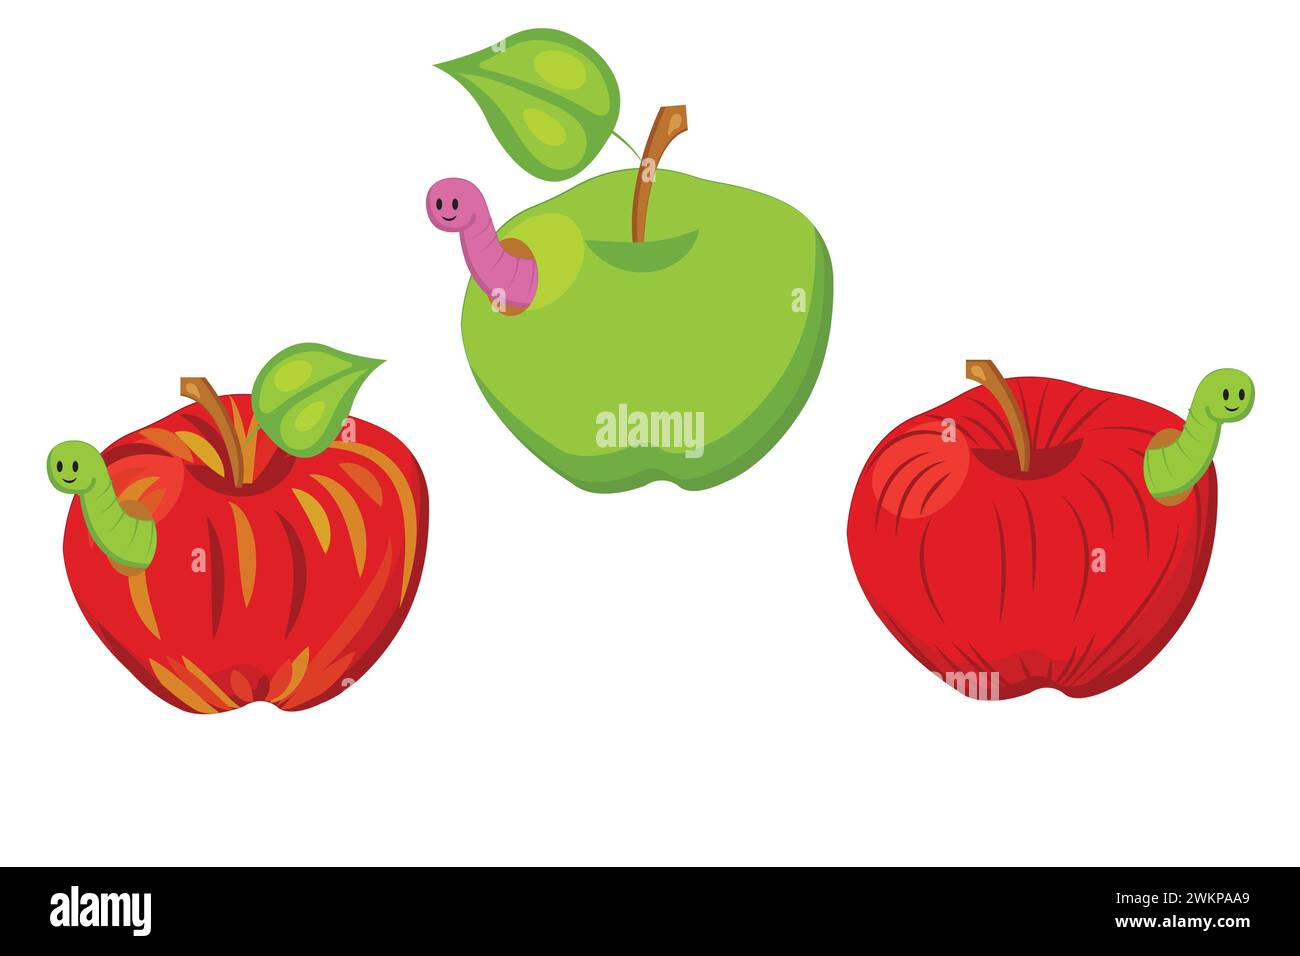 Set of red and green apples with smiling worms. Vector illustration in cartoon style isolated on a white background. Stock Vector